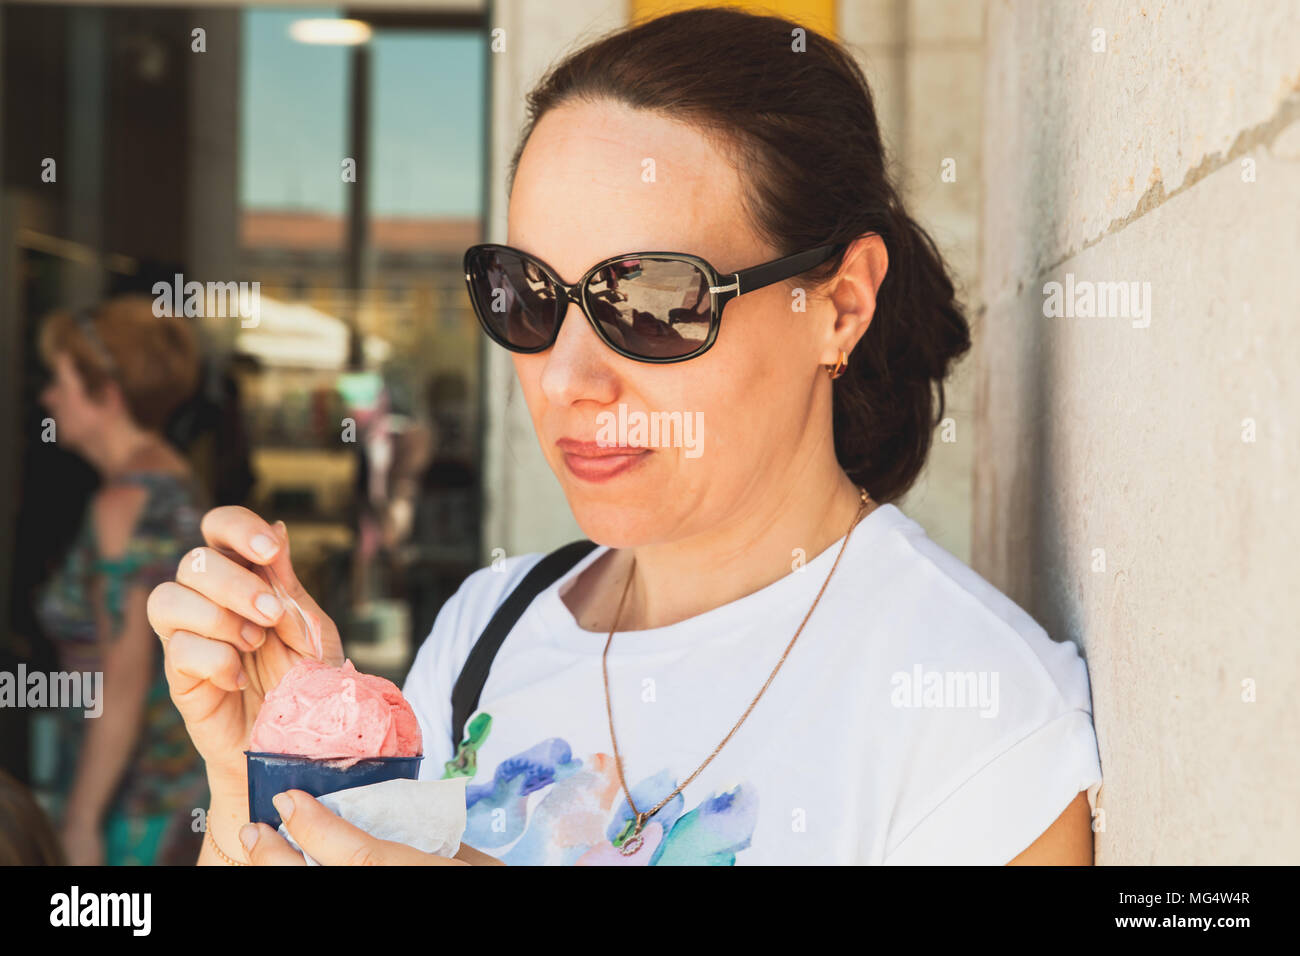 Young adult European woman eats pink ice cream, close-up outdoor portrait Stock Photo